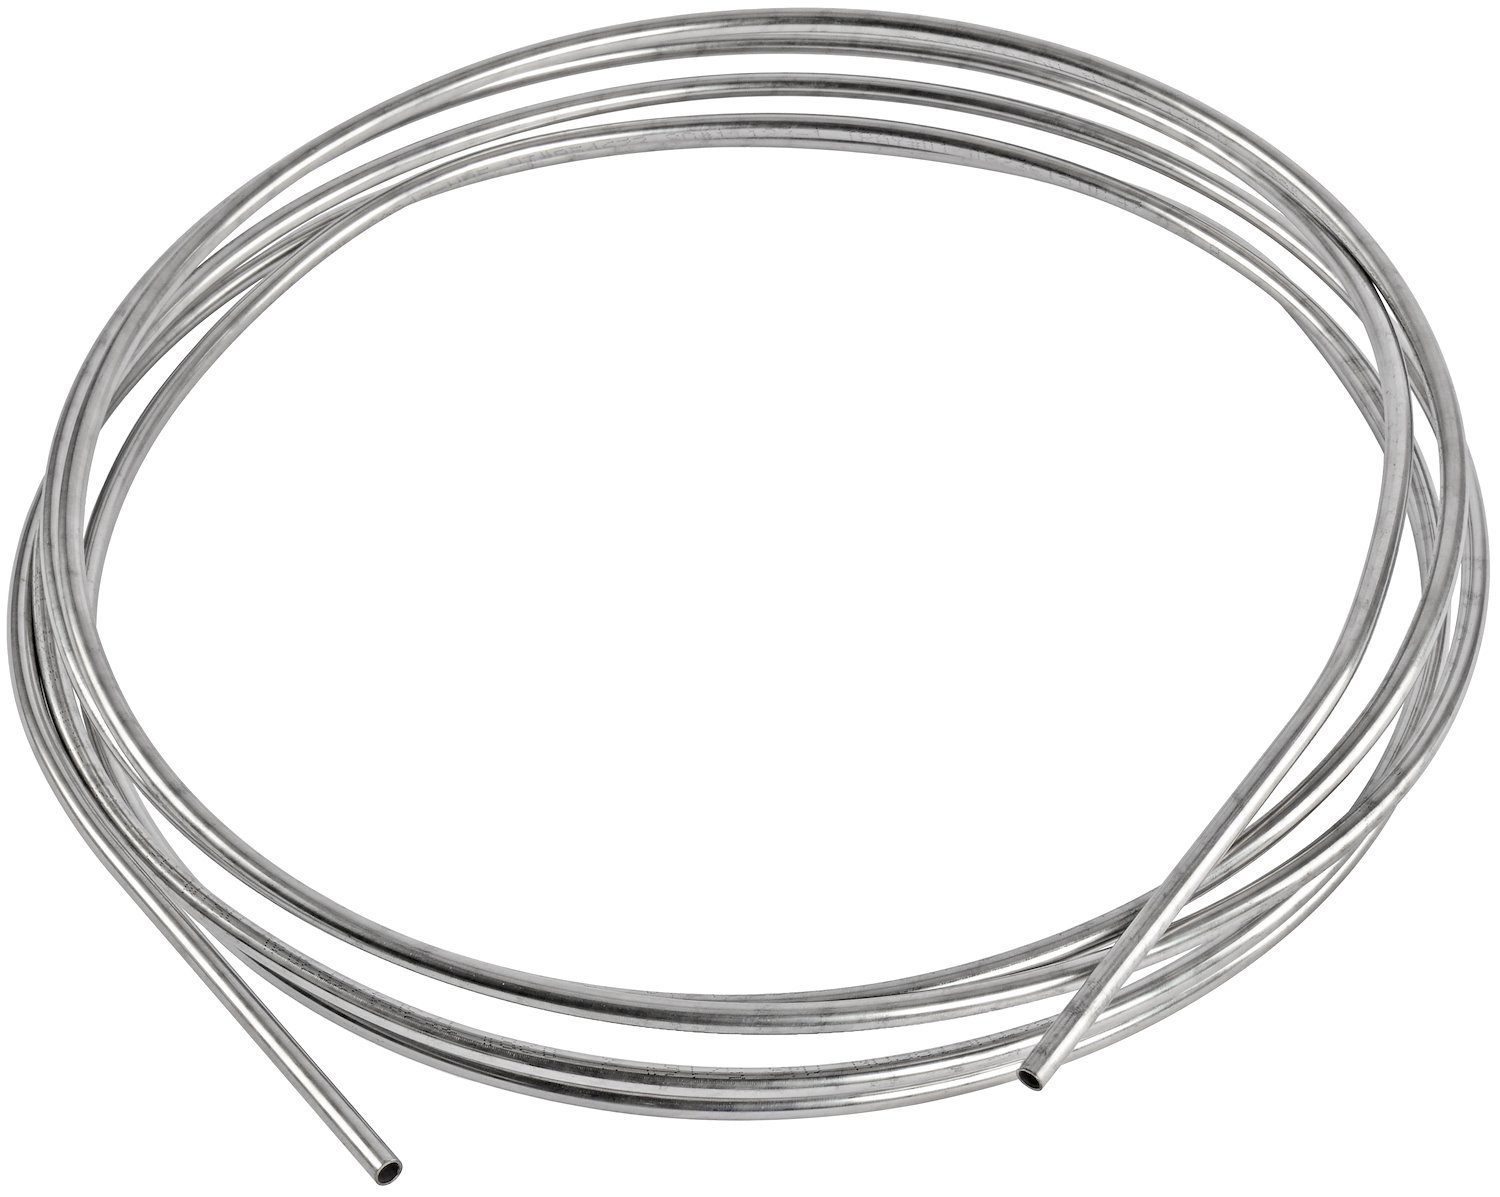 Stainless Steel Fuel Line Coil, 3/8 in. O.D. x .028 in. Wall Tubing [20 ft. Coil]